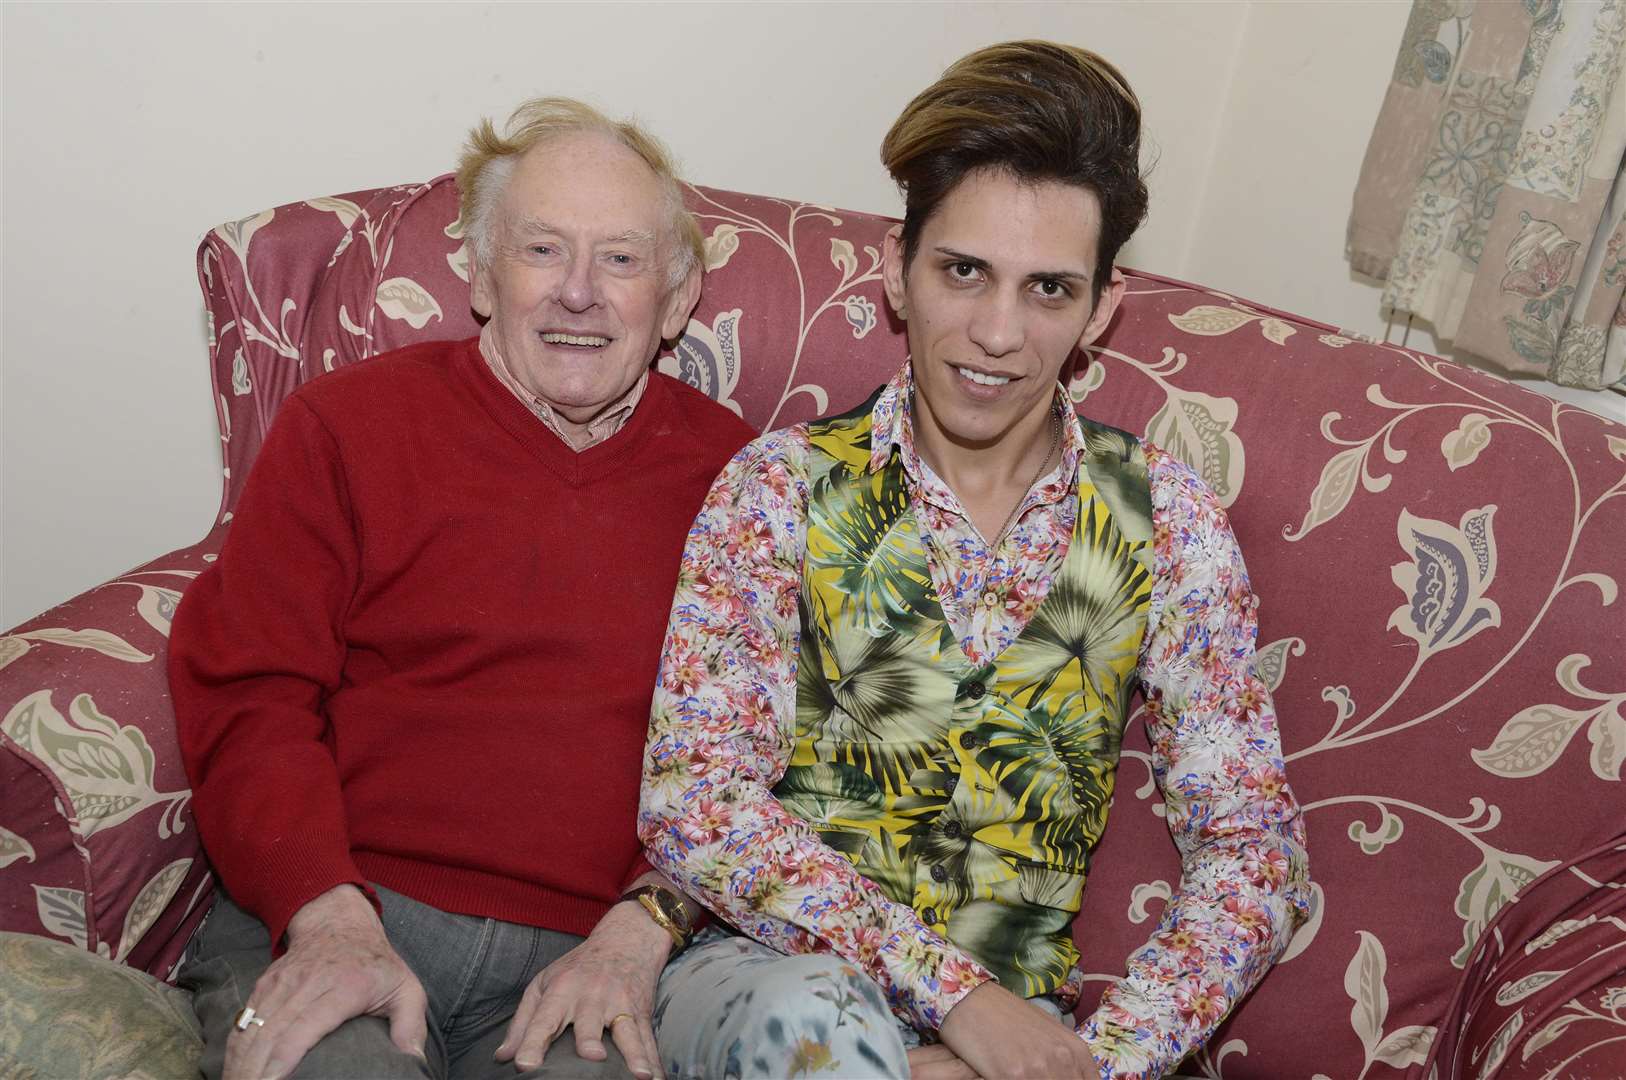 Retired clergyman Philip Clements and model Florin Marin met online